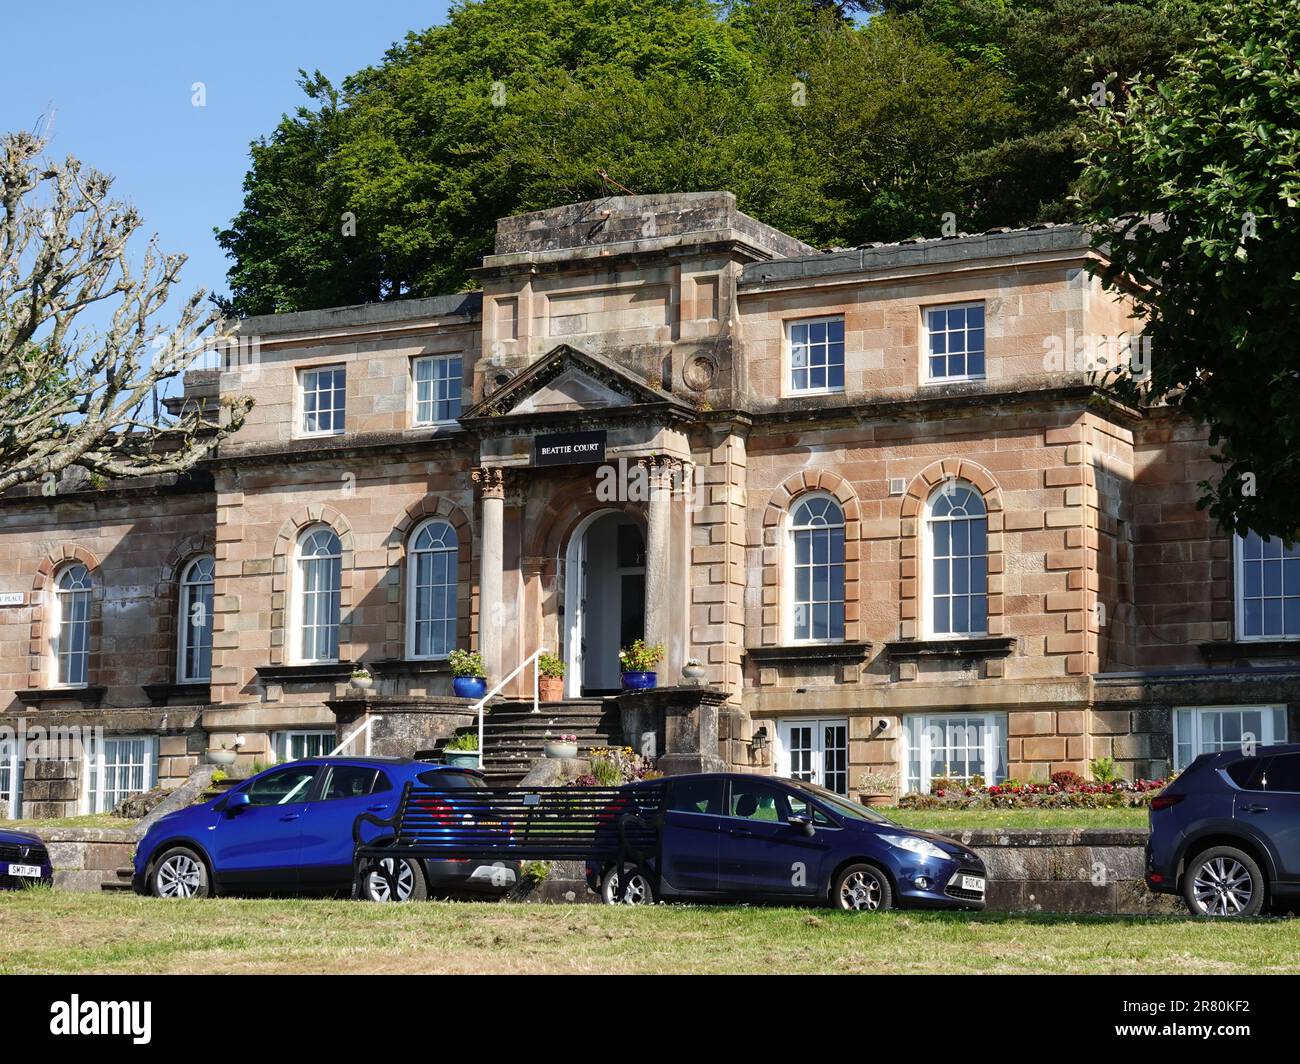 Originally built as the Royal Aquarium in 1875, Beattie Court is now divided into housing flats overlooking Rothesay Bay, Isle of Bute, Scotland, UK. Stock Photo